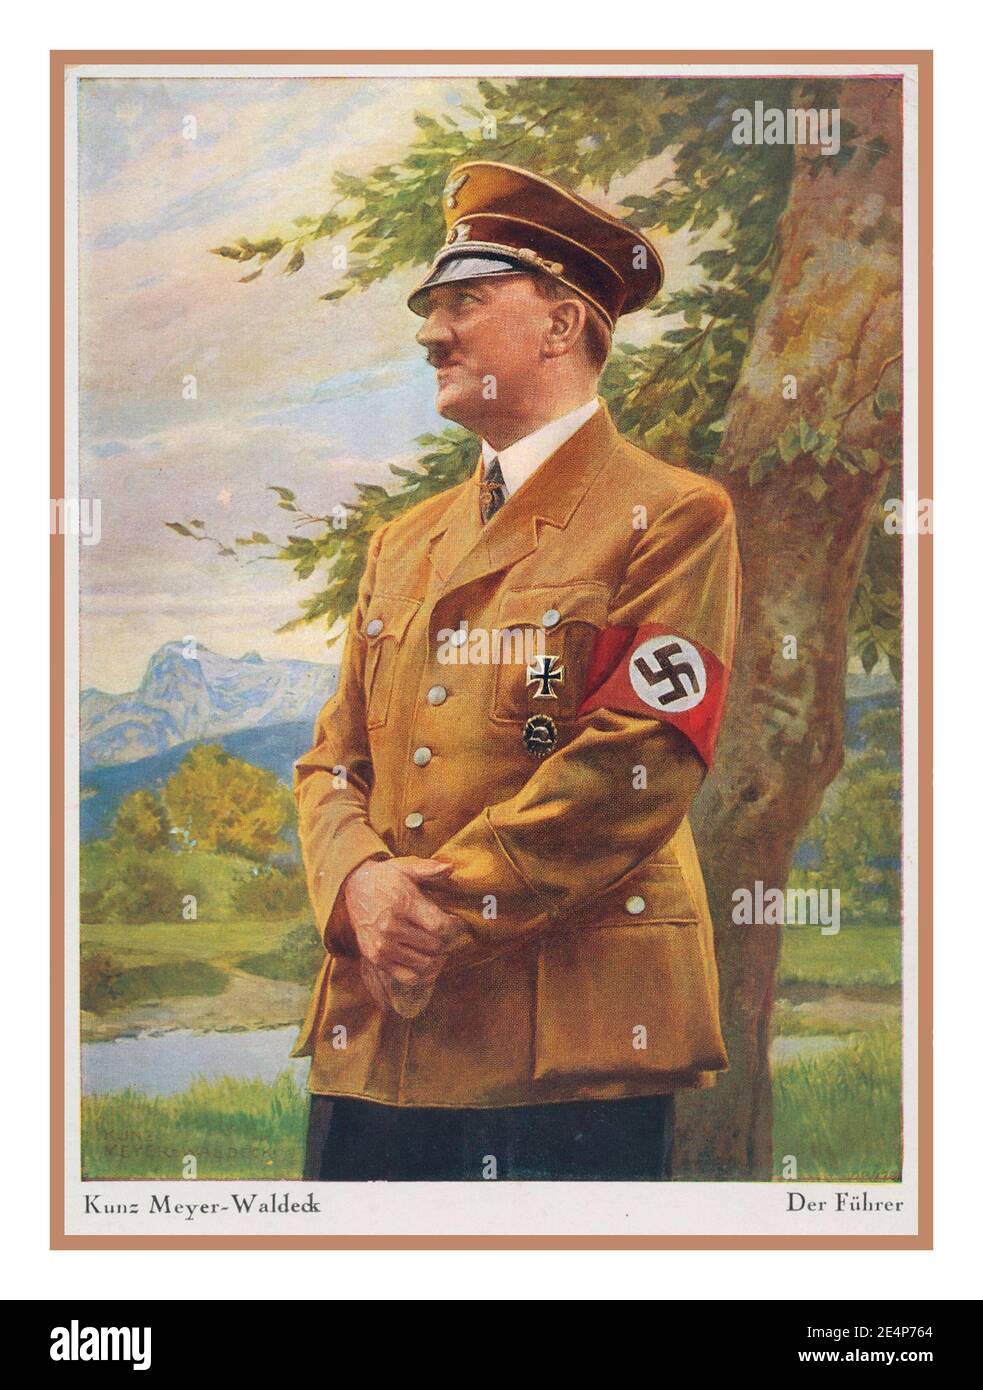 DER FÜHRER 1940's Adolf Hitler painting illustration in military uniform wearing a swastika armband 1940 propaganda poster painting card depicting 'Der Führer' after a painting by Kunz Meyer-Waldeck, Stock Photo